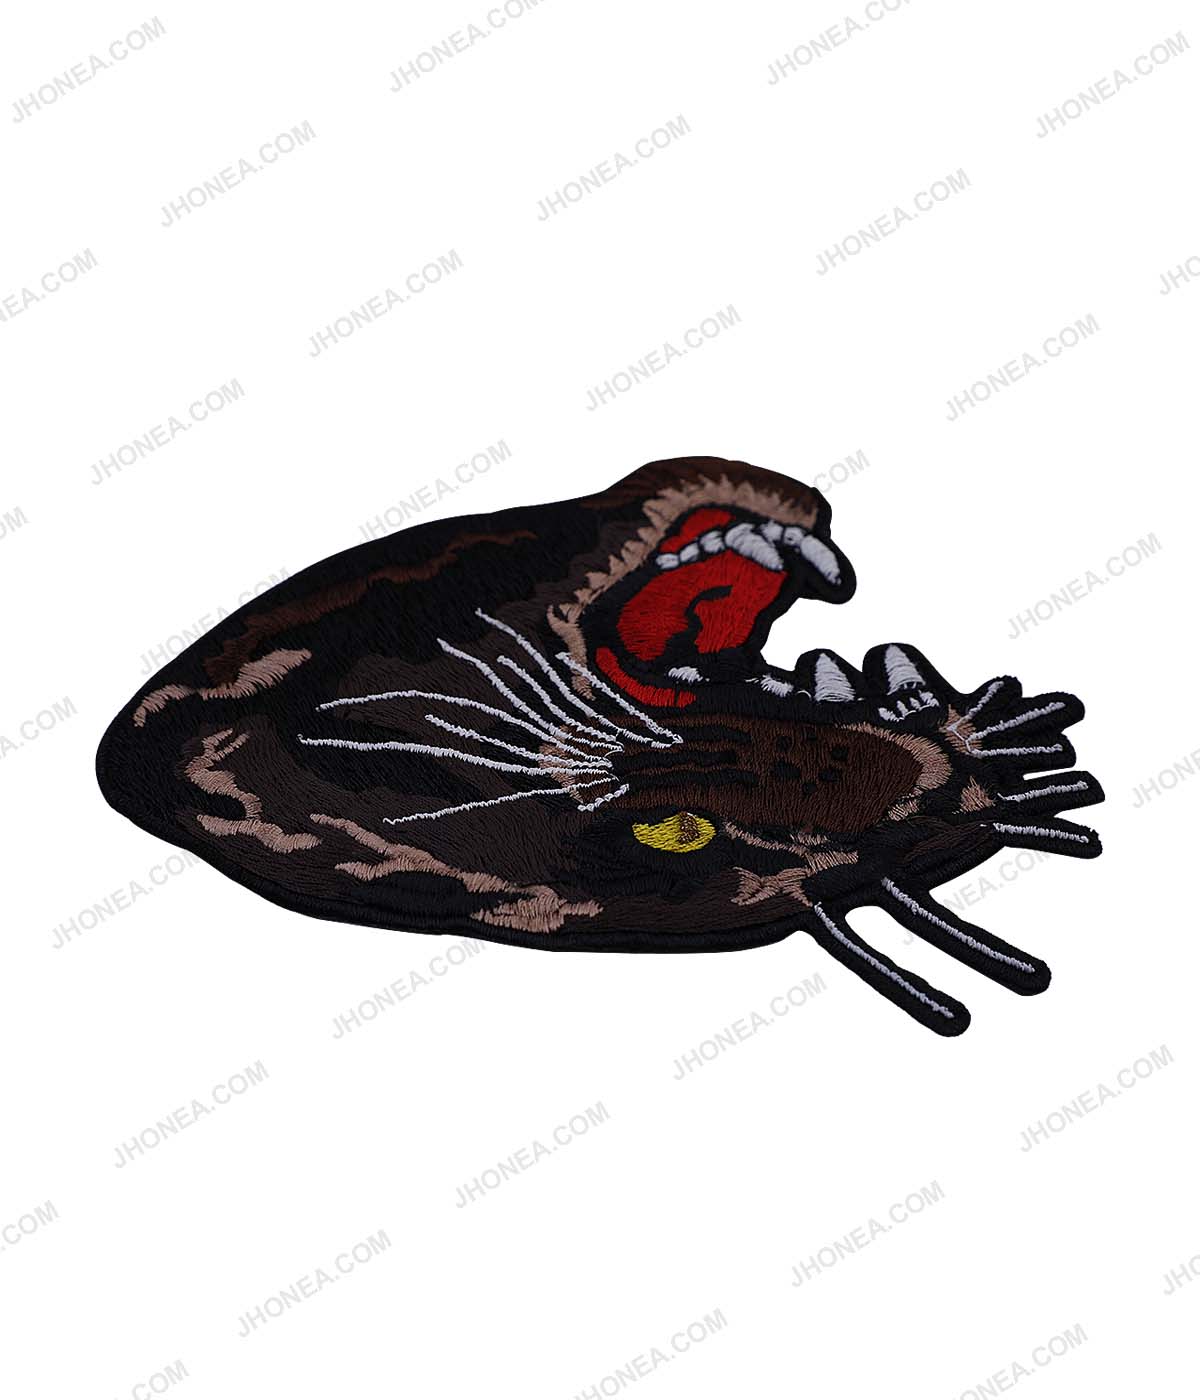 Broad Roaring Tiger Face Embroidery Applique Patch